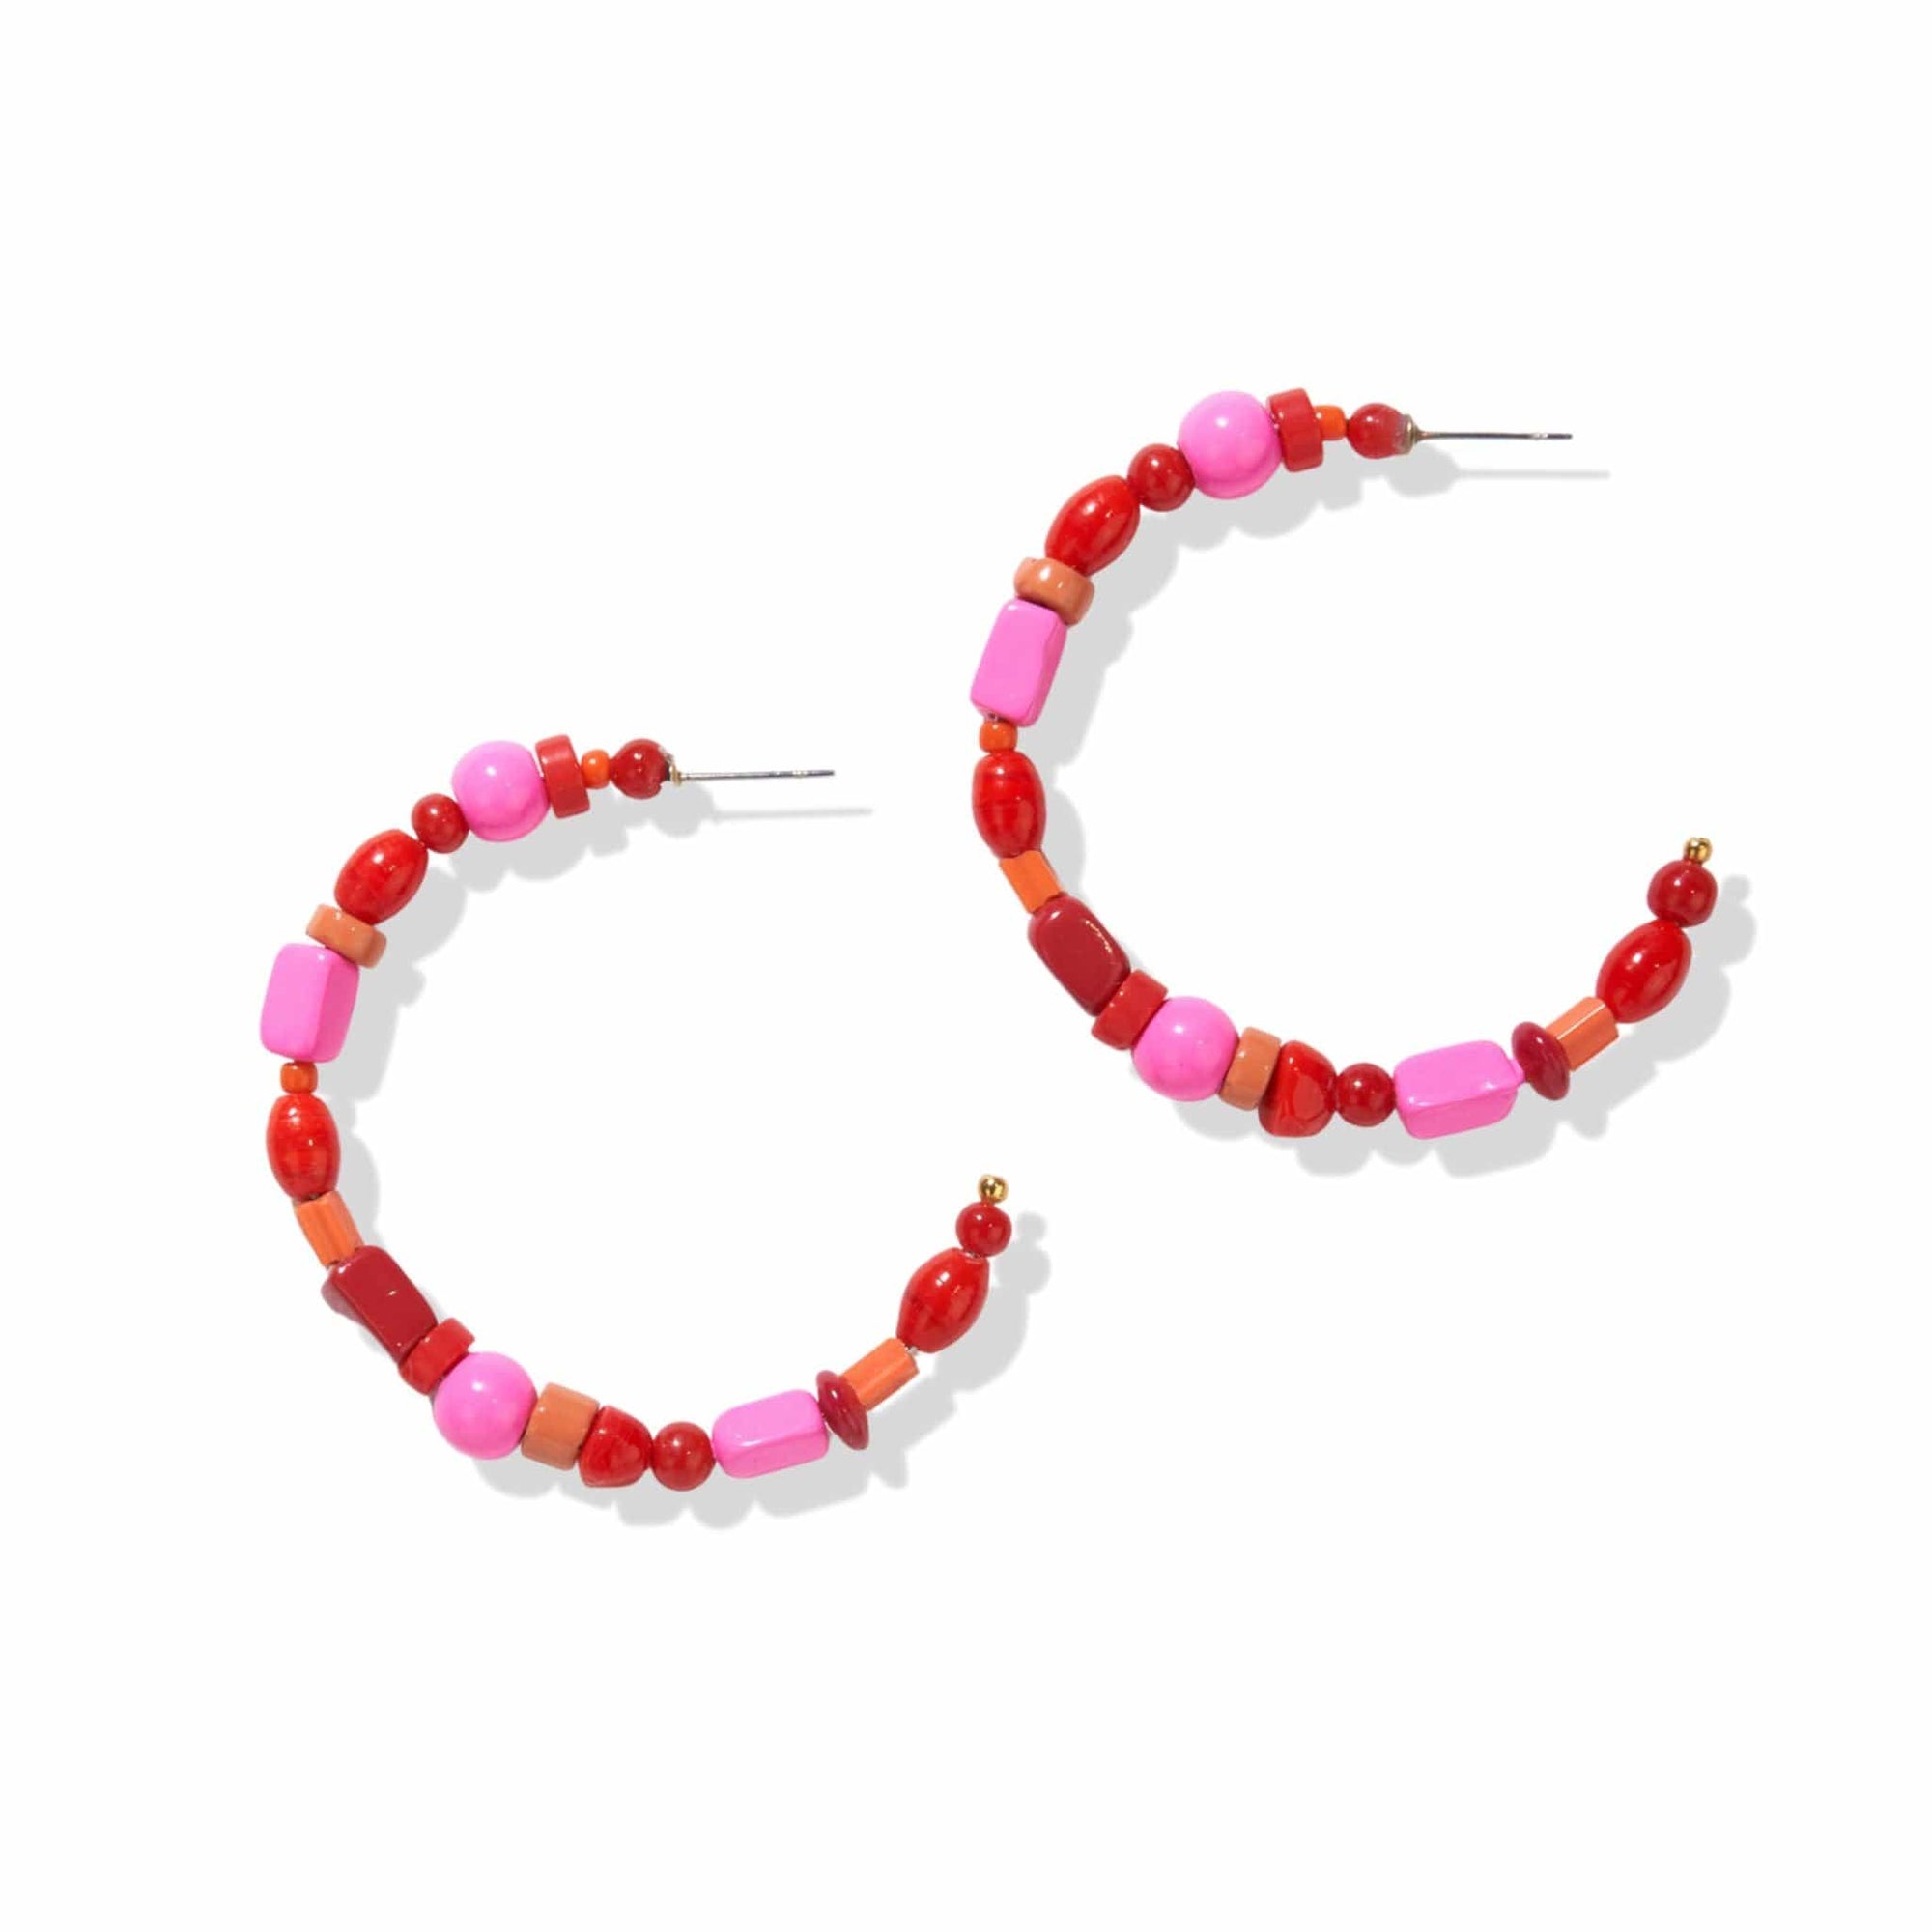 Annie Mixed Beaded Hoop Earrings Red and Hot Pink Wholesale